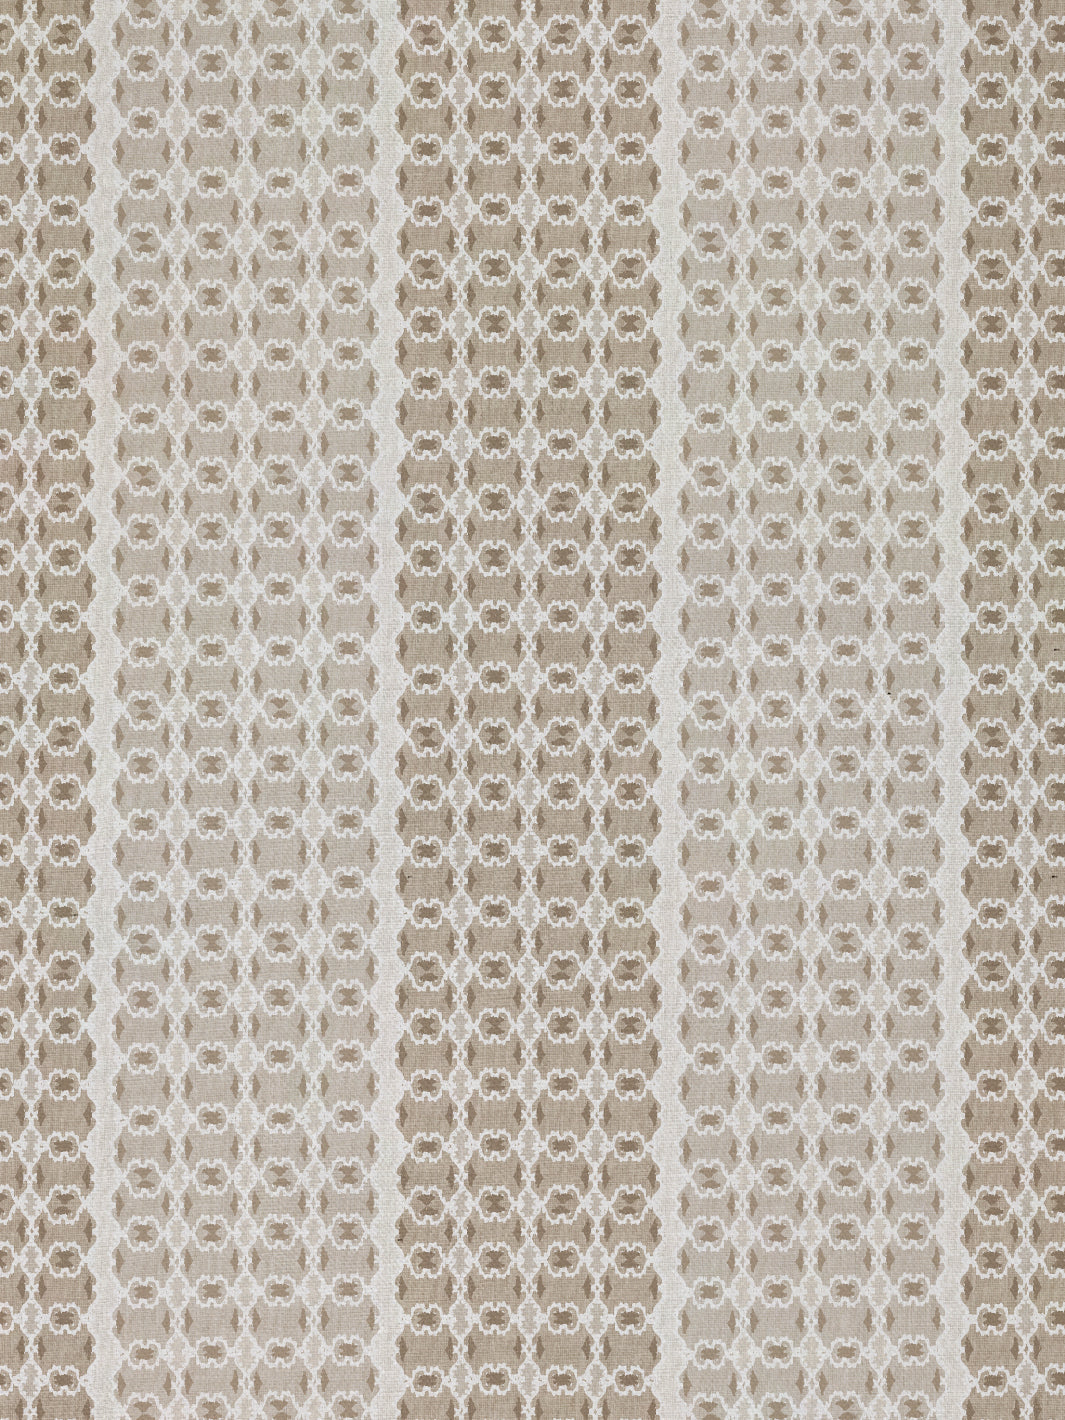 'Medallion Stripe' Linen Fabric by Nathan Turner - Neutral